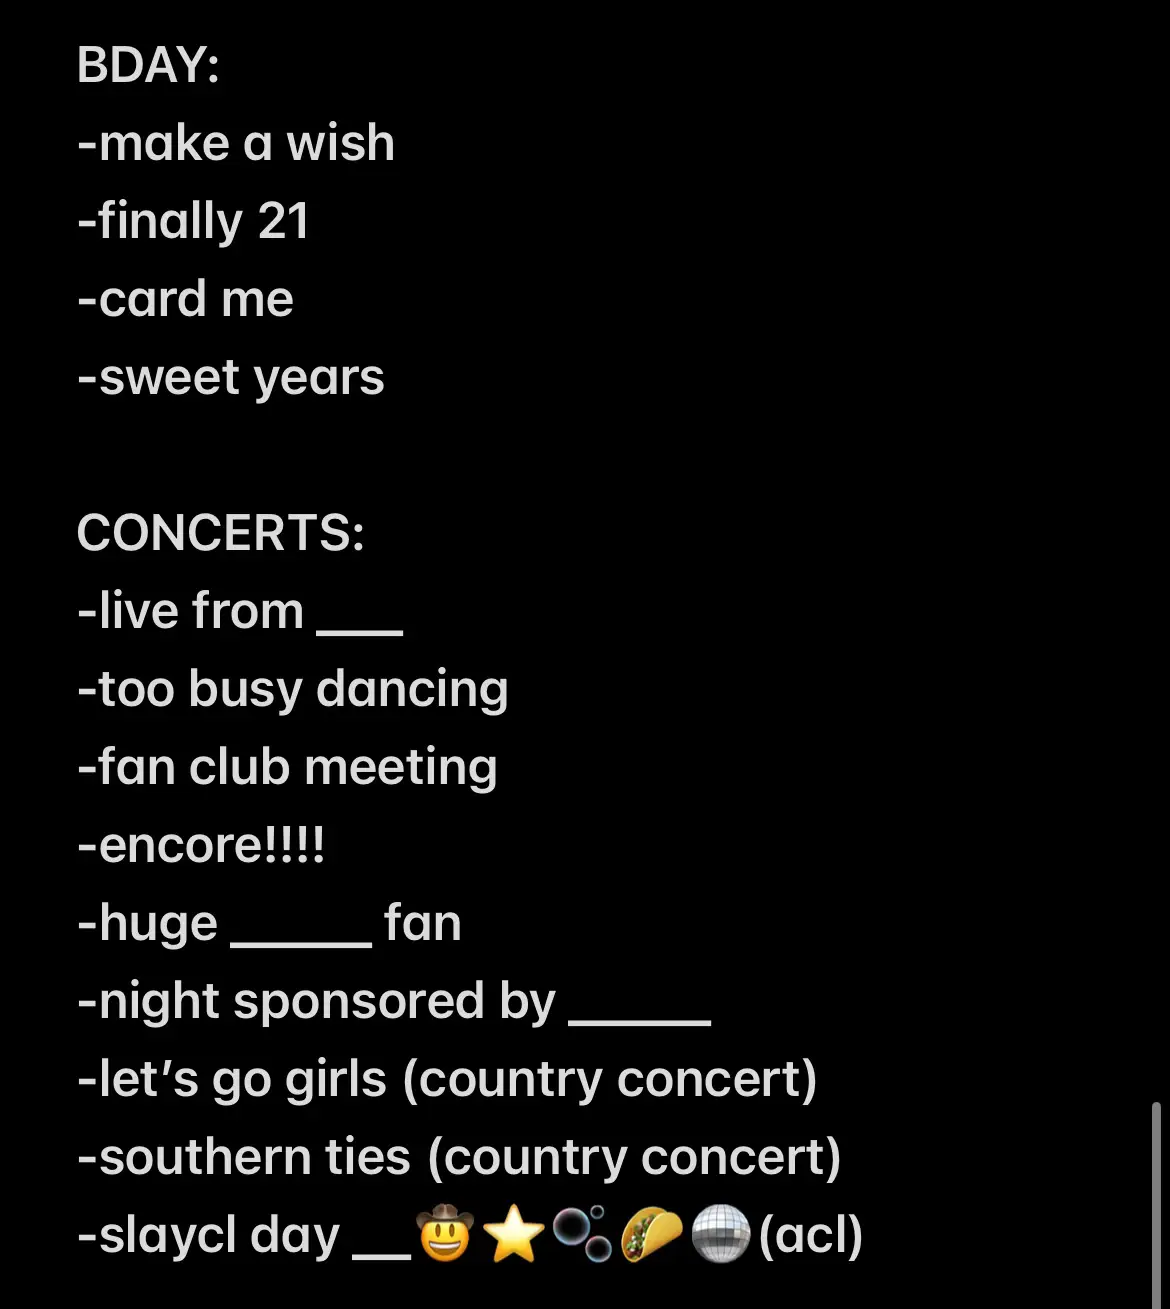  A list of events for a fan club meeting and a country concert.